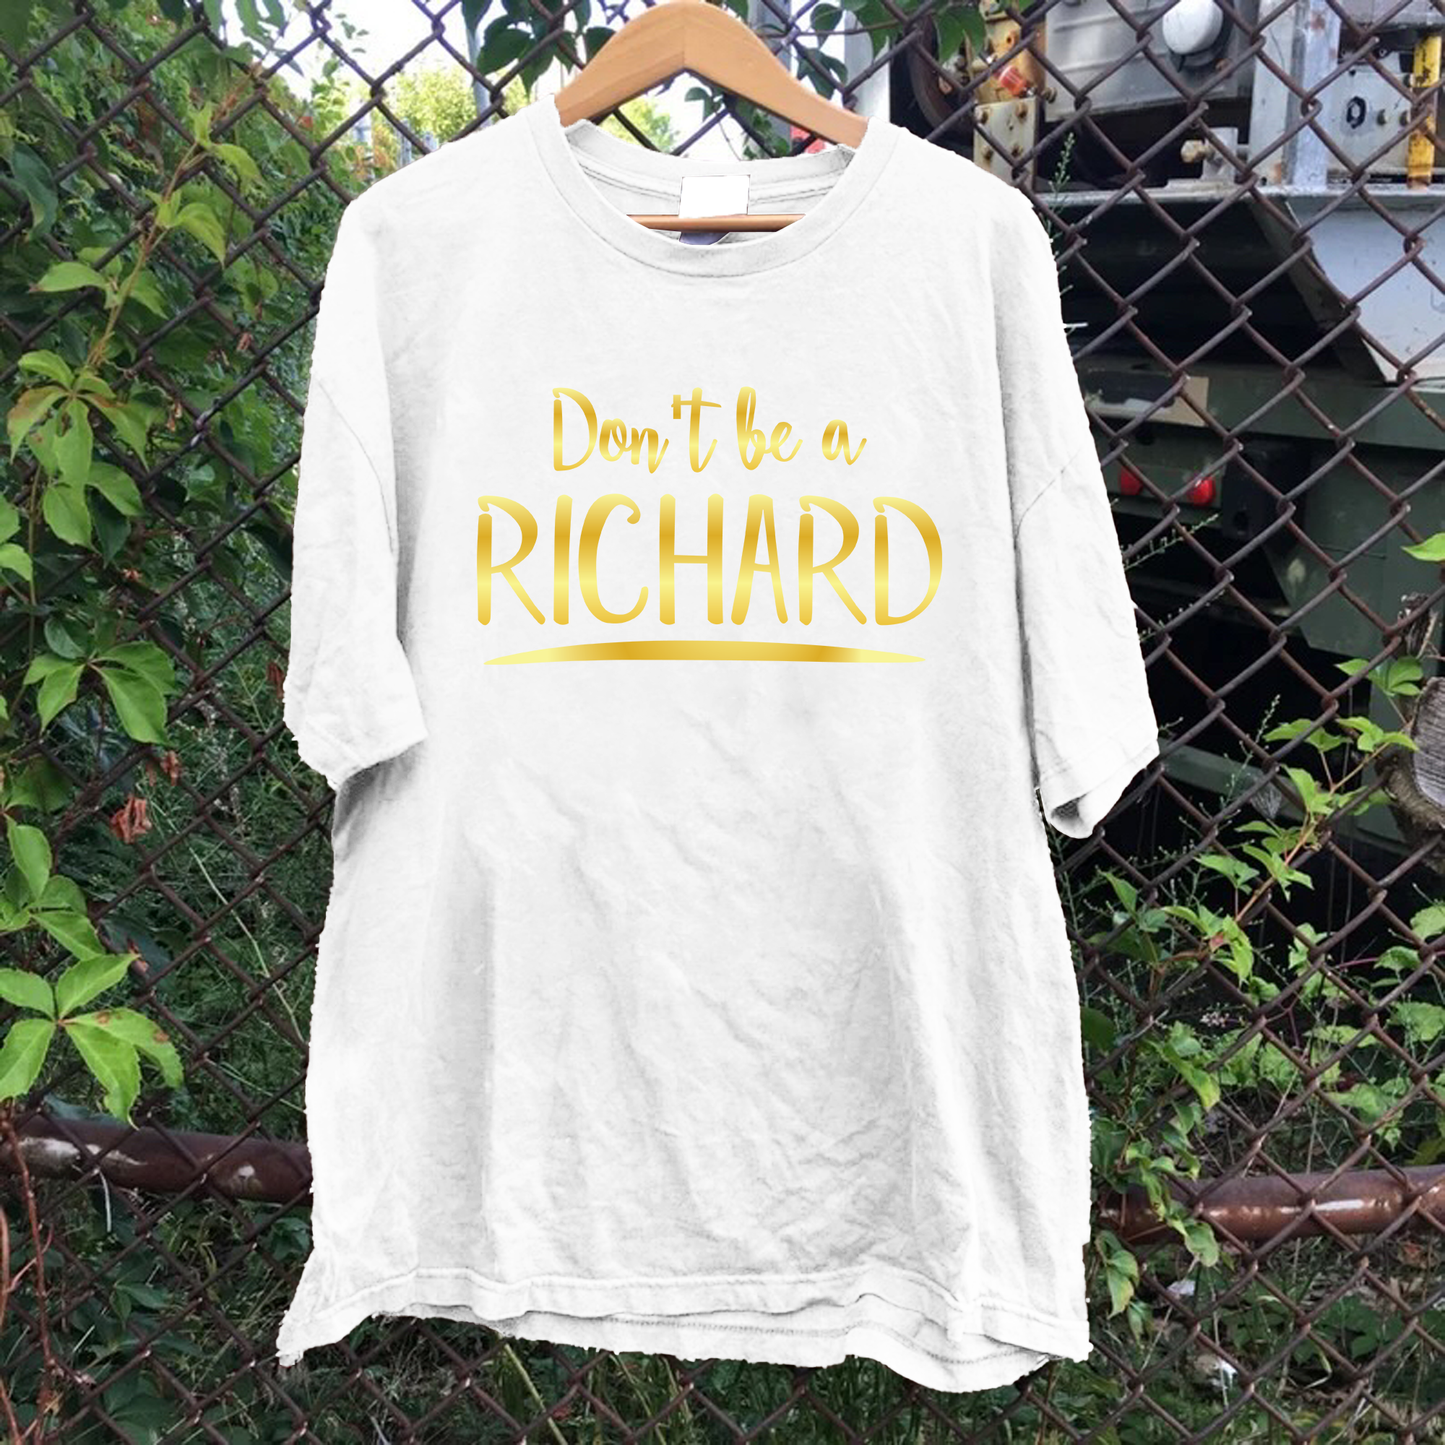 Don't Be a Richard Tee